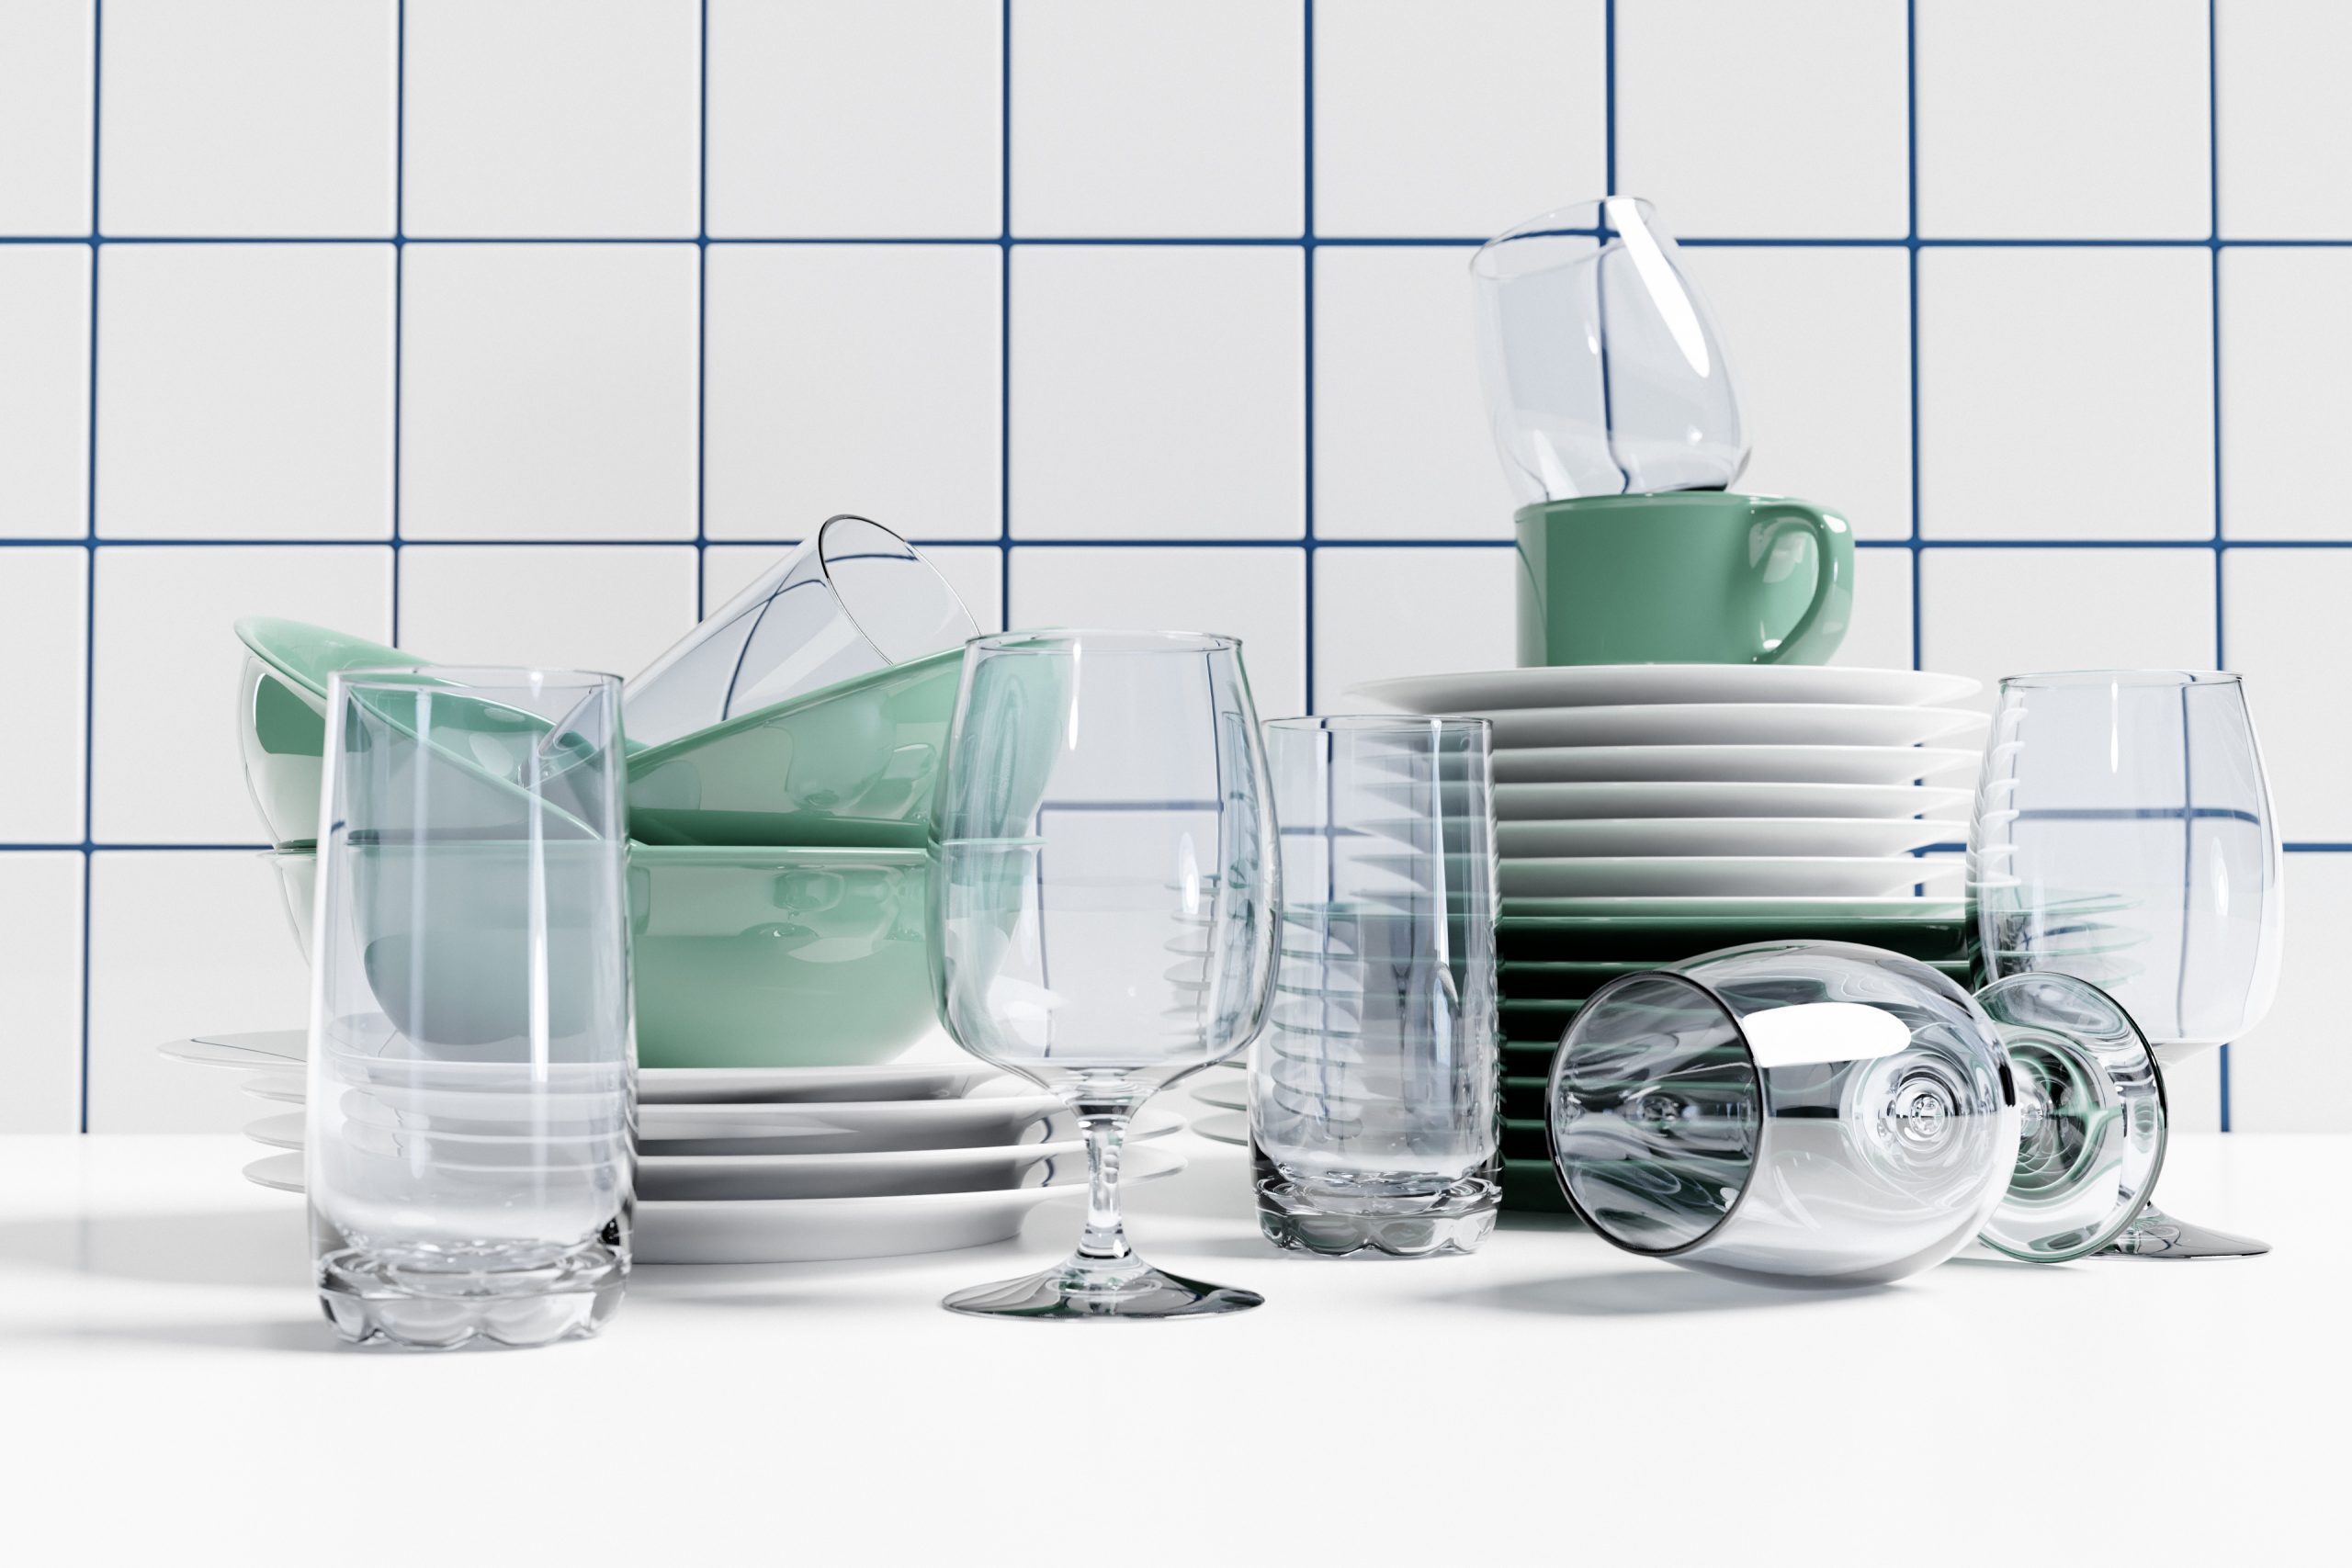 Set of clean plates, glasses, glasses. 3d illustration. Realistic crockery, folded kitchen utensils. A stack of ceramic dishes.